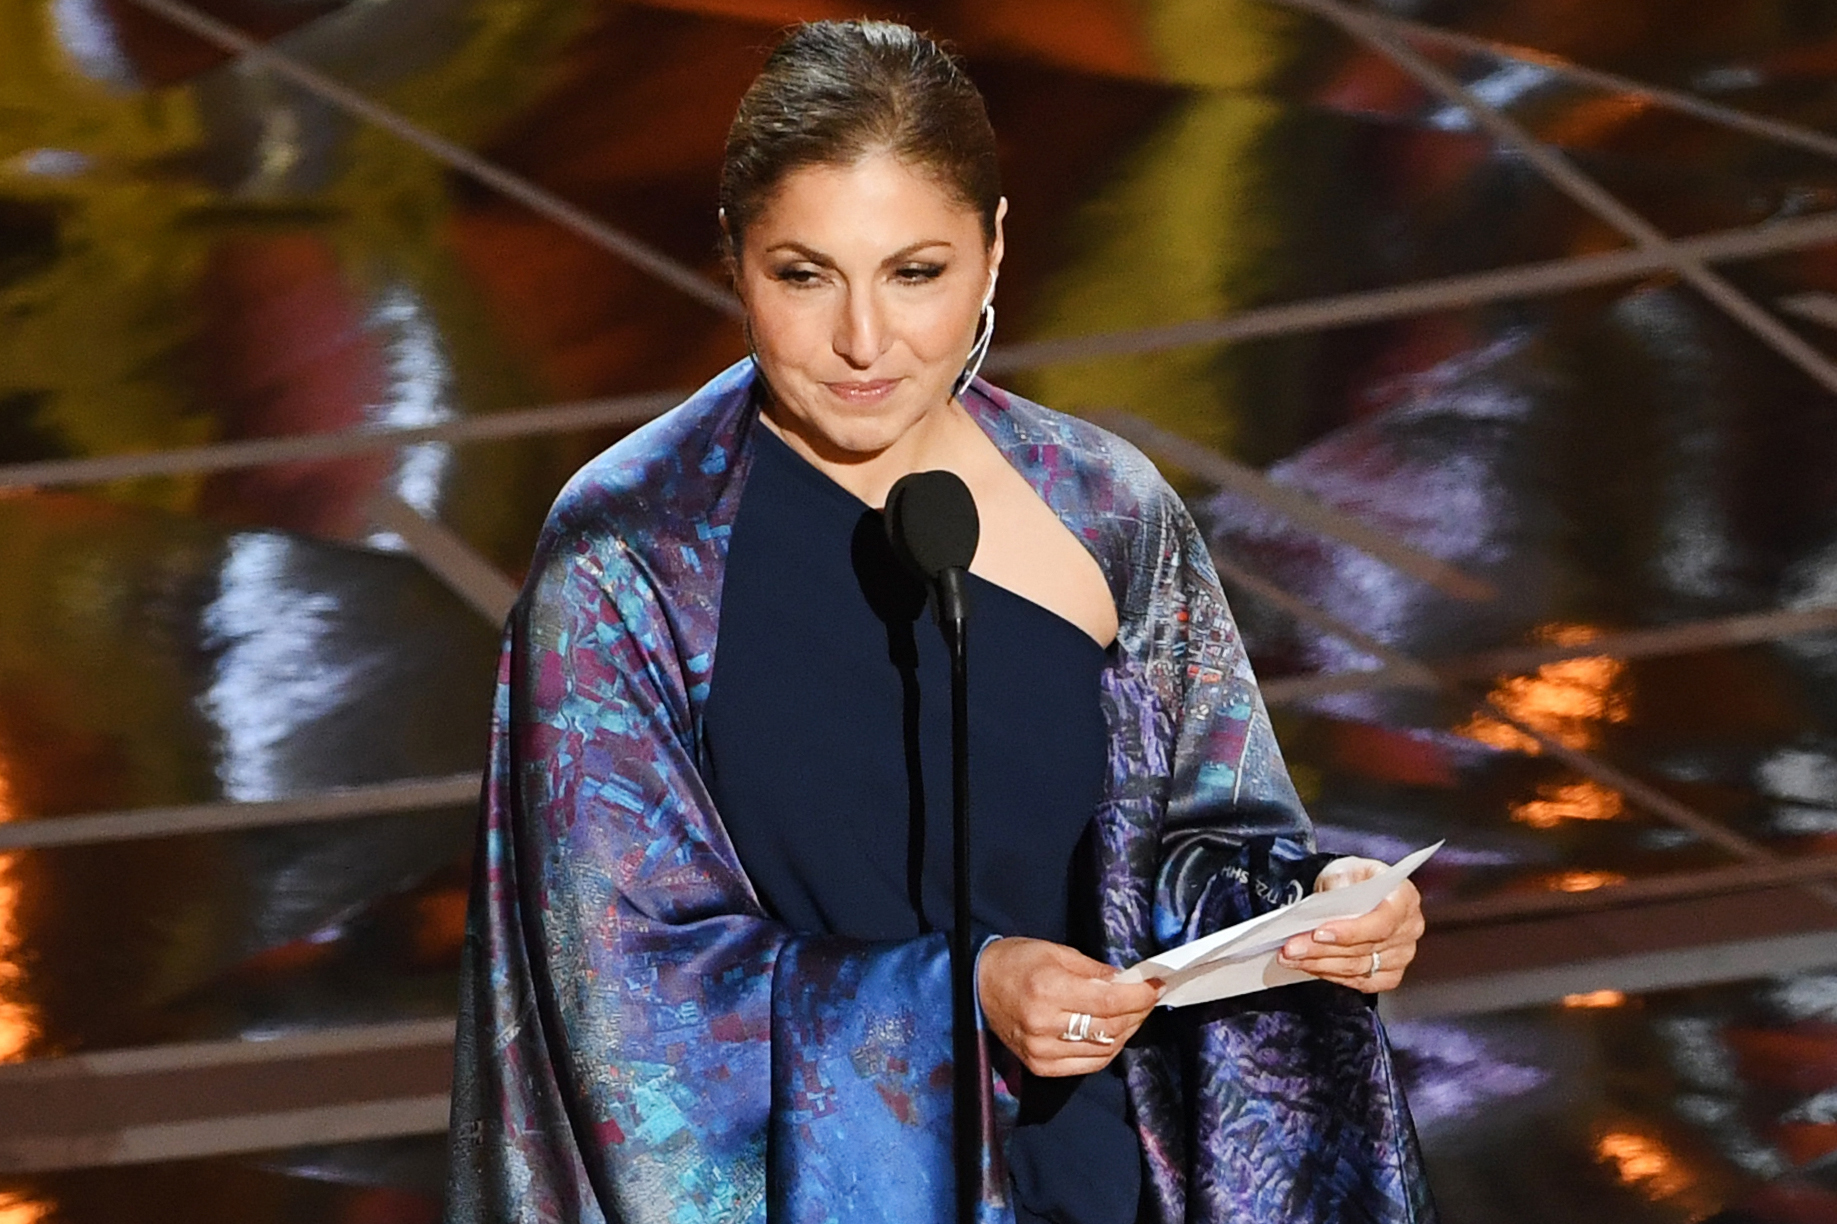 Engineer/astronaut Anousheh Ansari accepts Best Foreign Language Film for The Salesman on behalf of director Asghar Farhadi during the 89th Annual Academy Awards, on Feb. 26, 2017 in Hollywood, Calif.